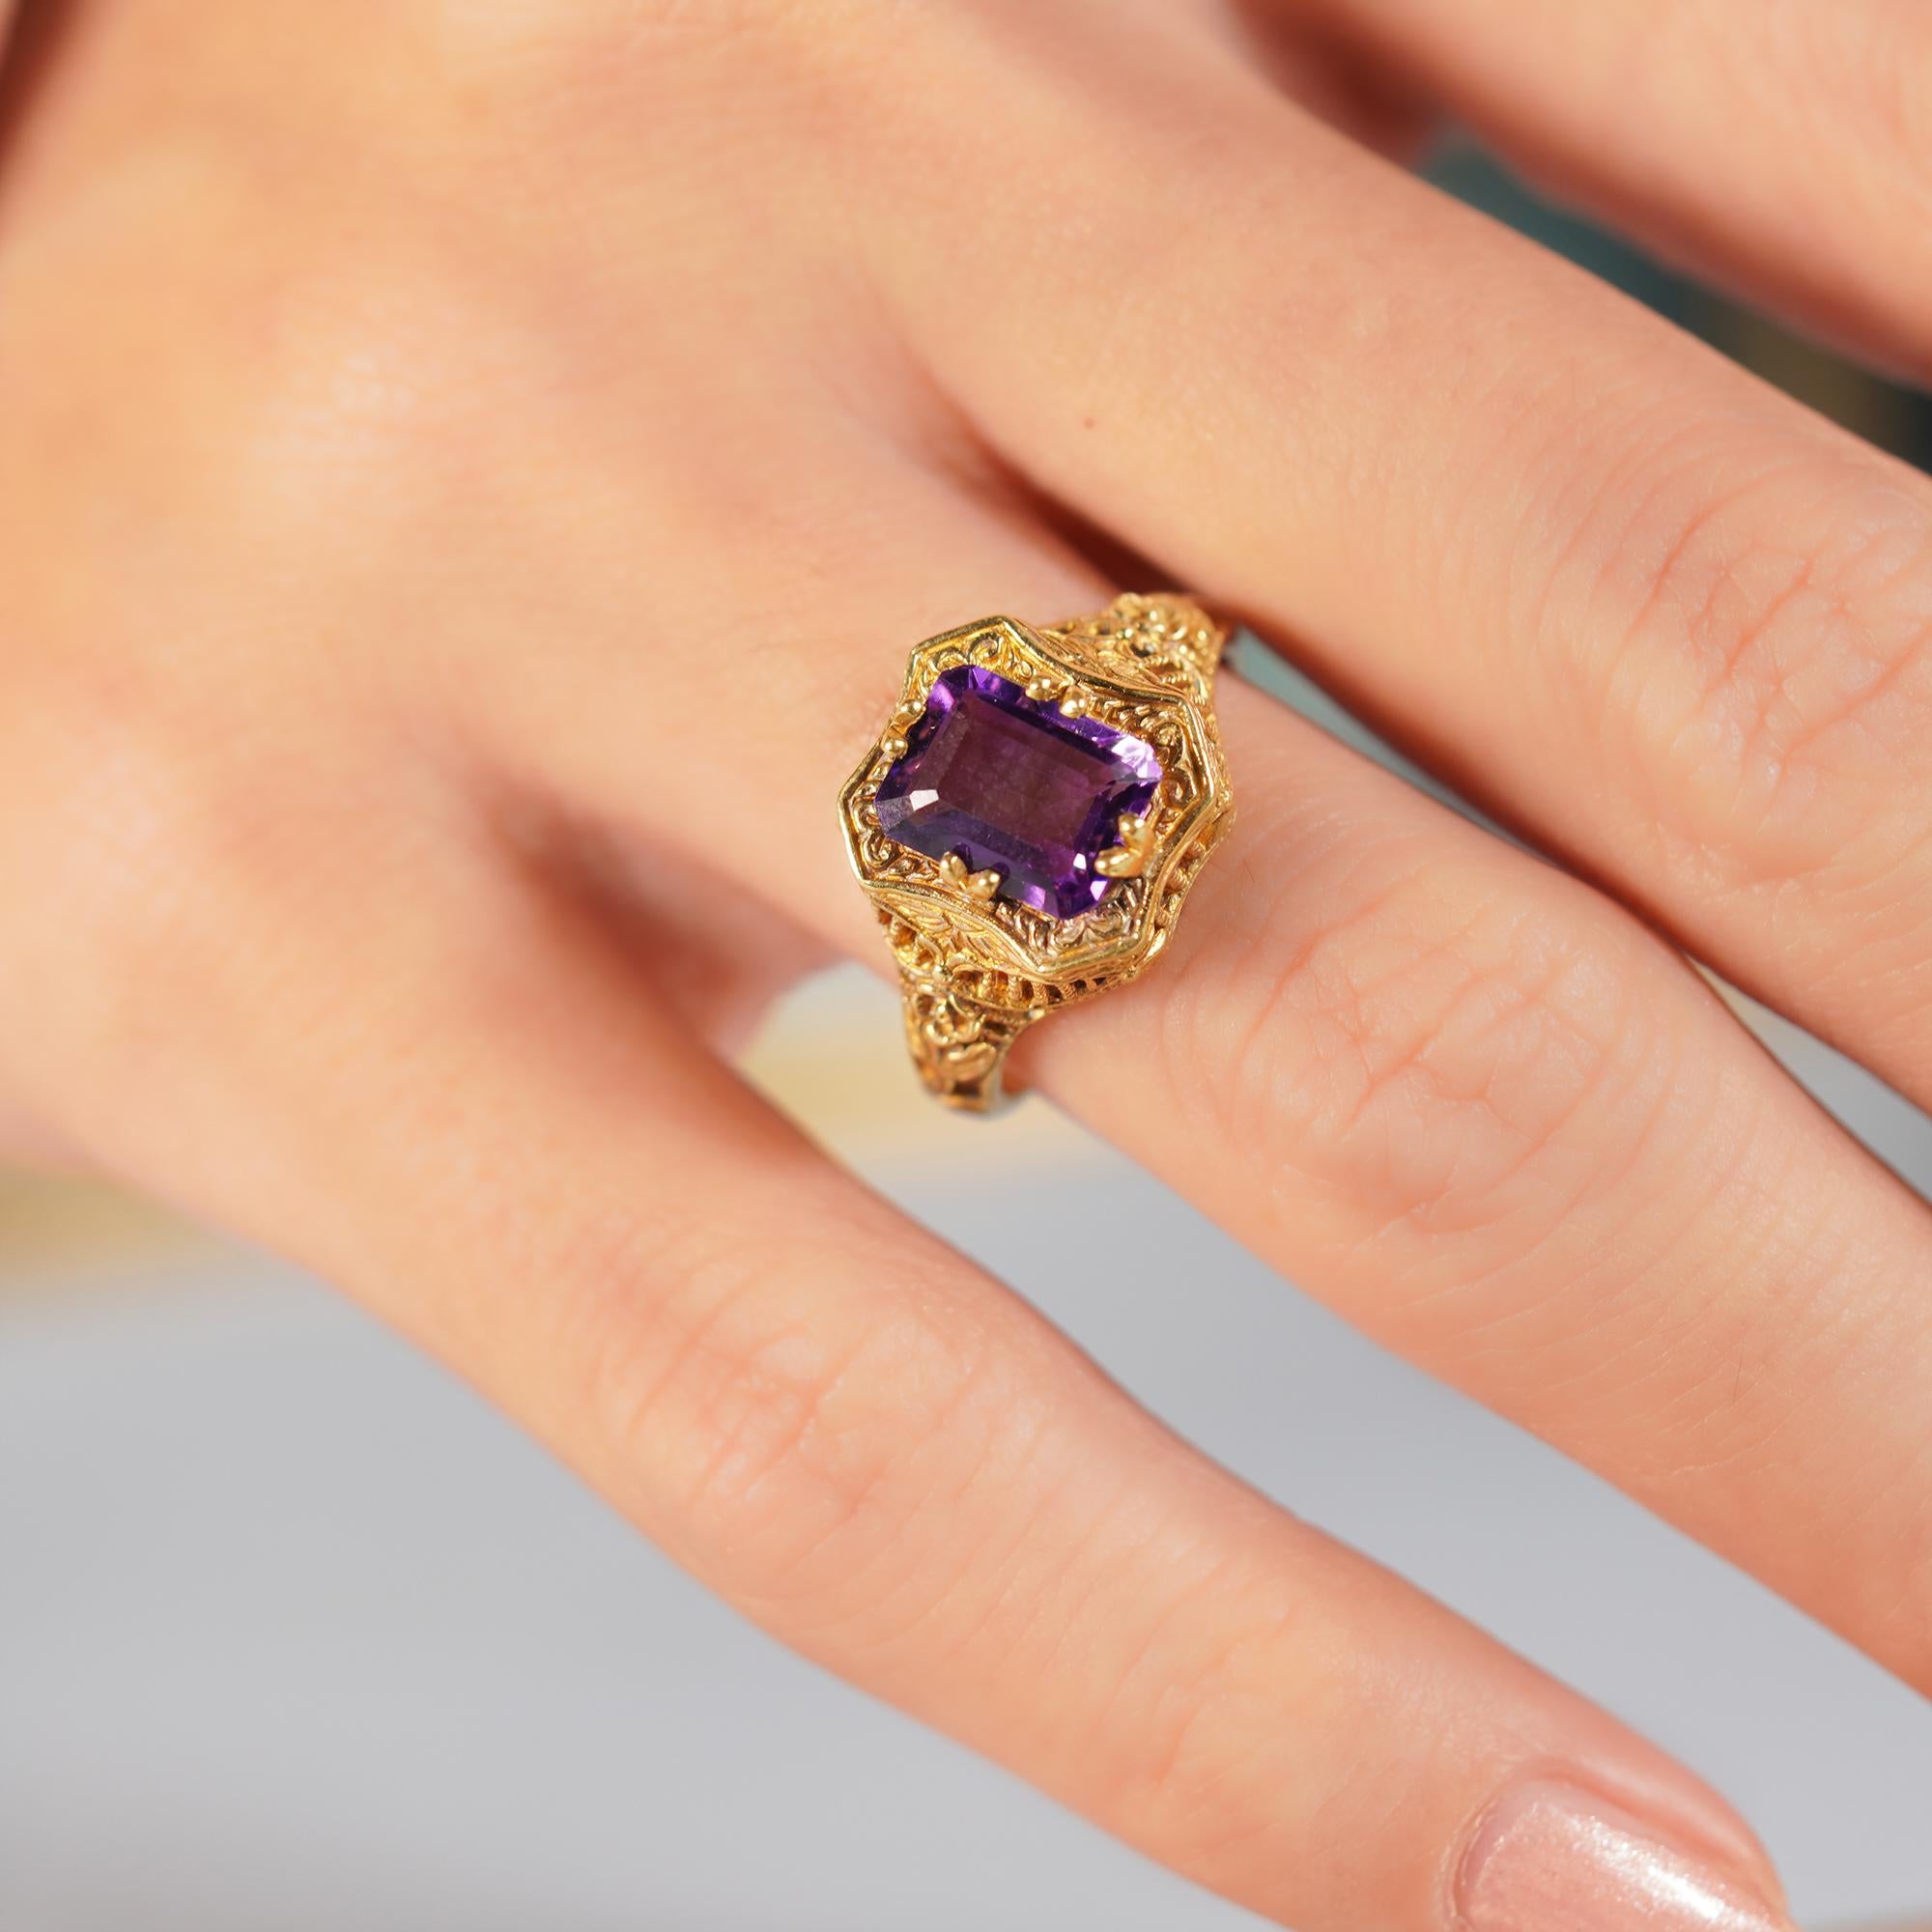 For Sale:  Natural Emerald Cut Amethyst Vintage Style Filigree Ring in Solid 9K Yellow Gold 8